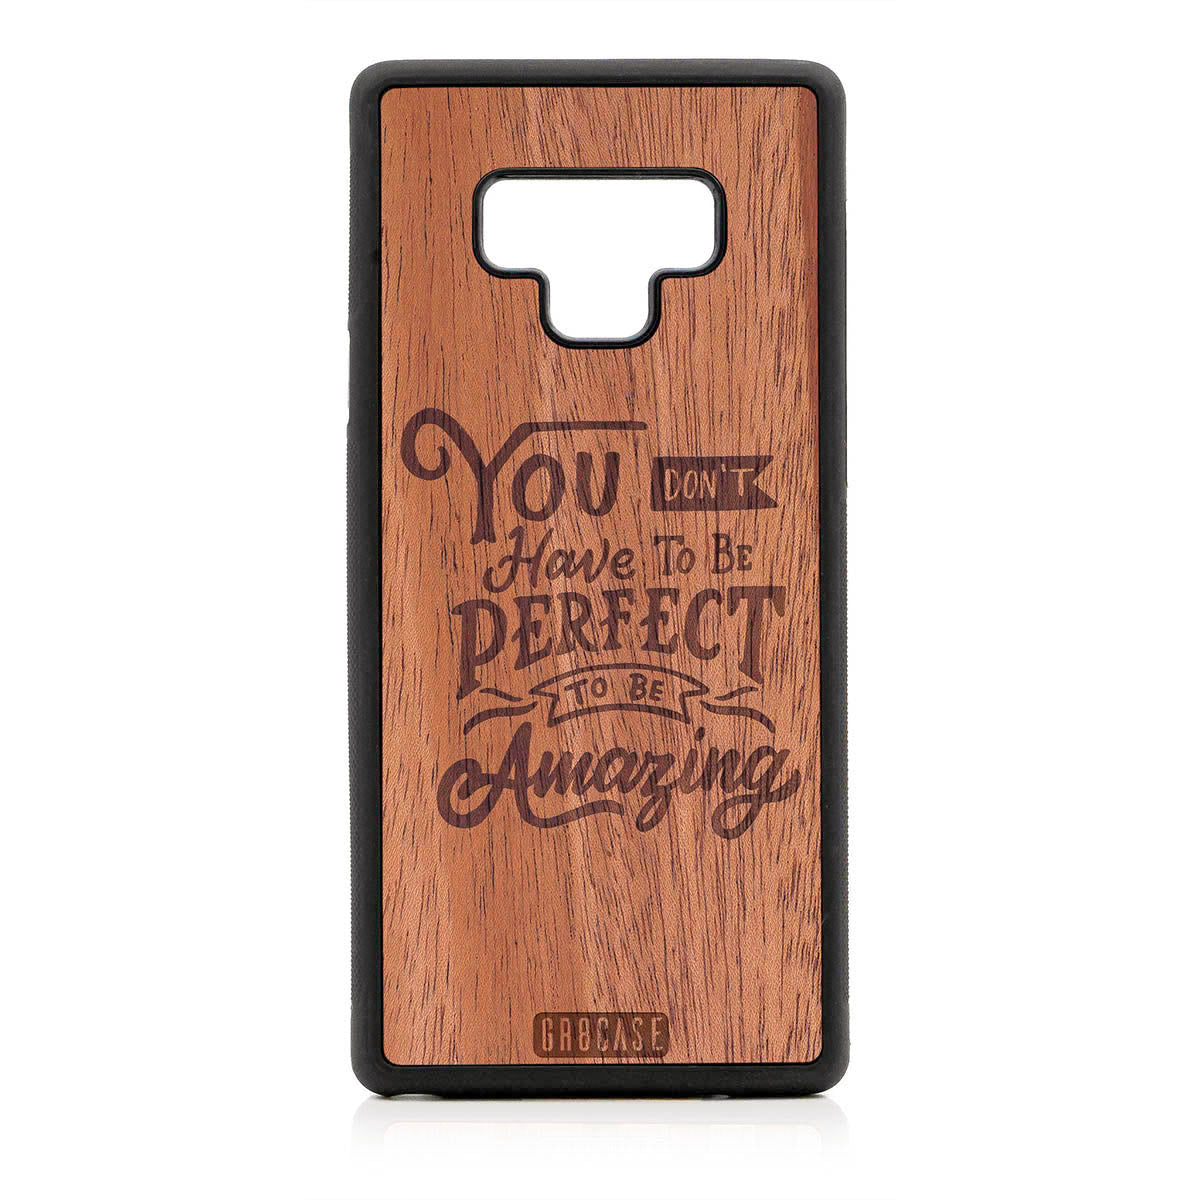 You Don't Have To Be Perfect To Be Amazing Design Wood Case For Samsung Galaxy Note 9